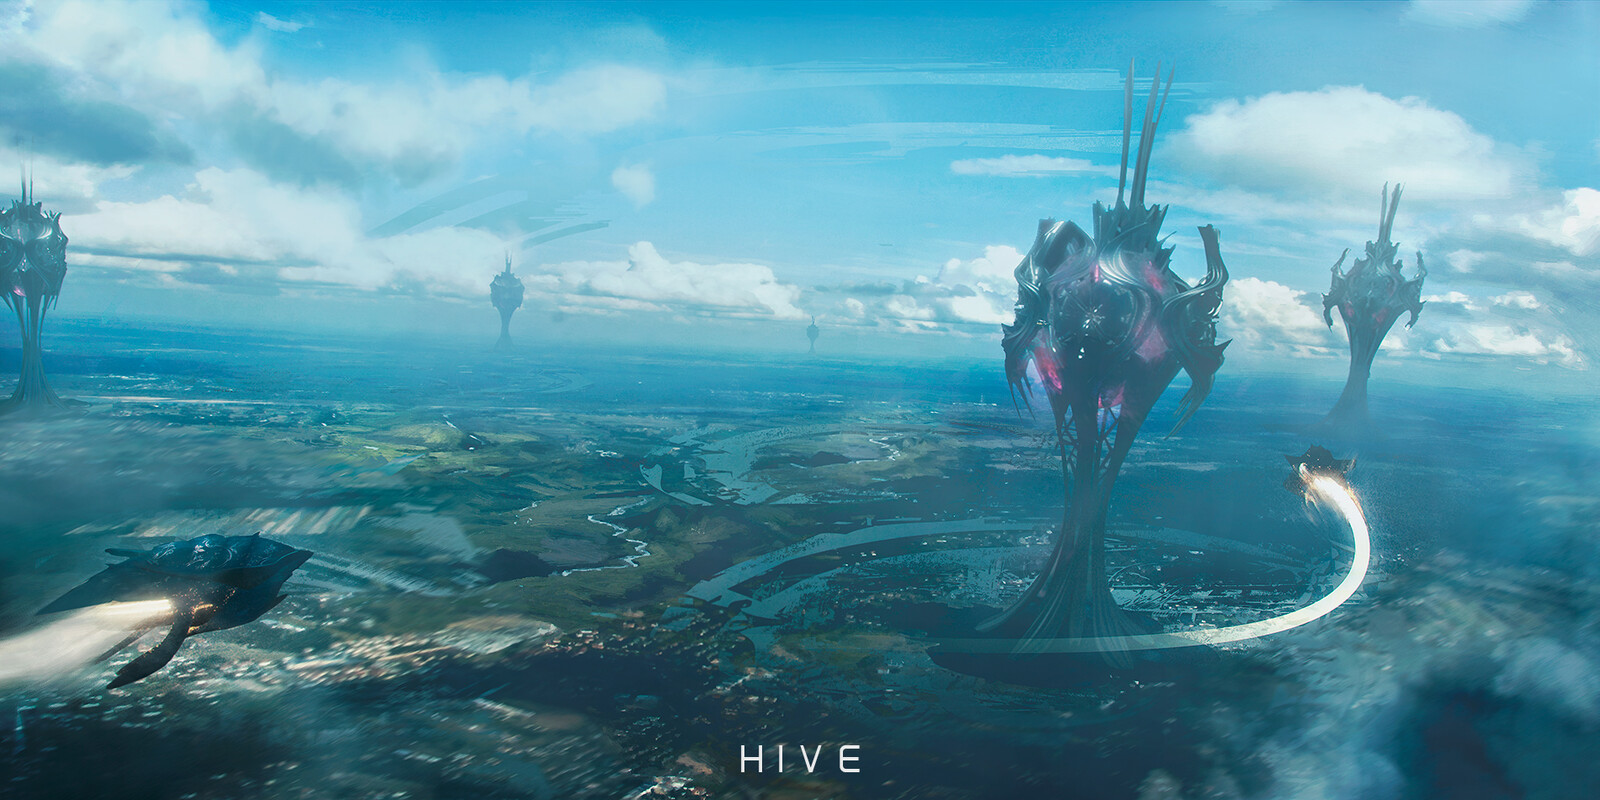 The HIVE